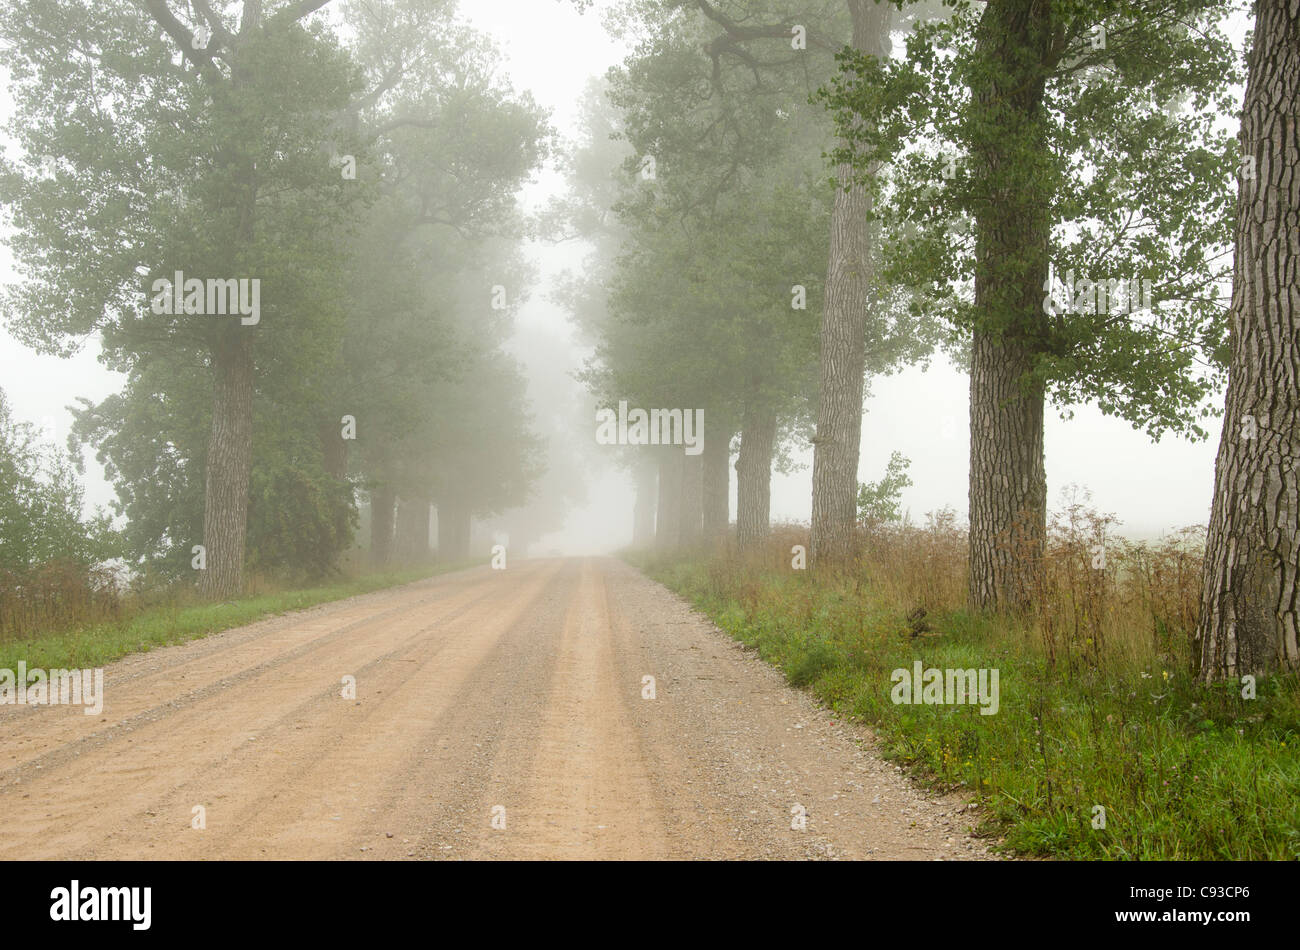 Leveled gravel road surrounded by old trees alley and drowned in fog. Stock Photo